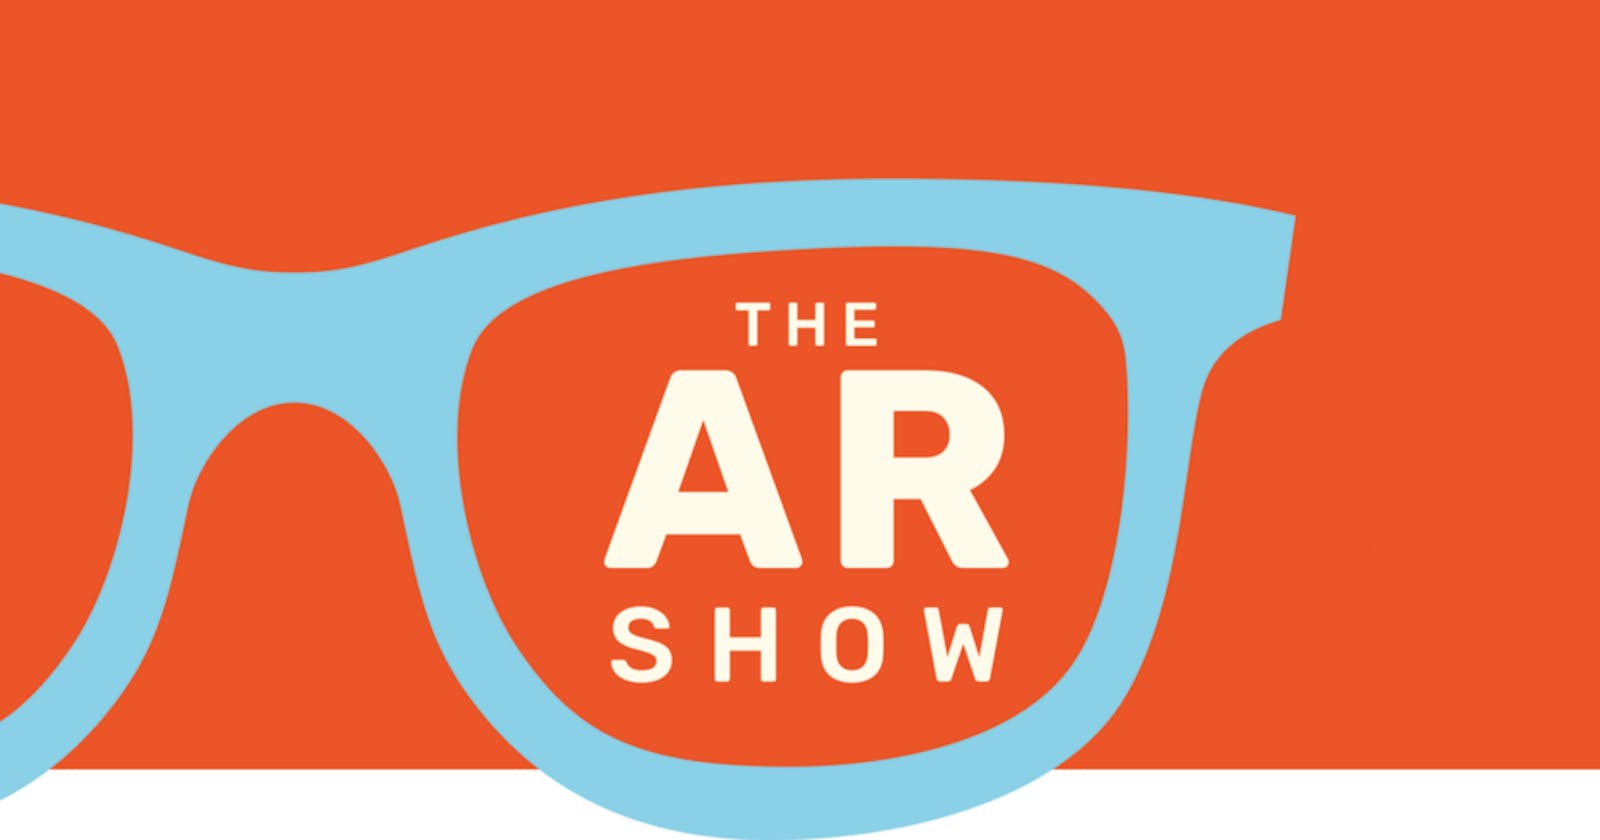 echo3D featured on The AR Show